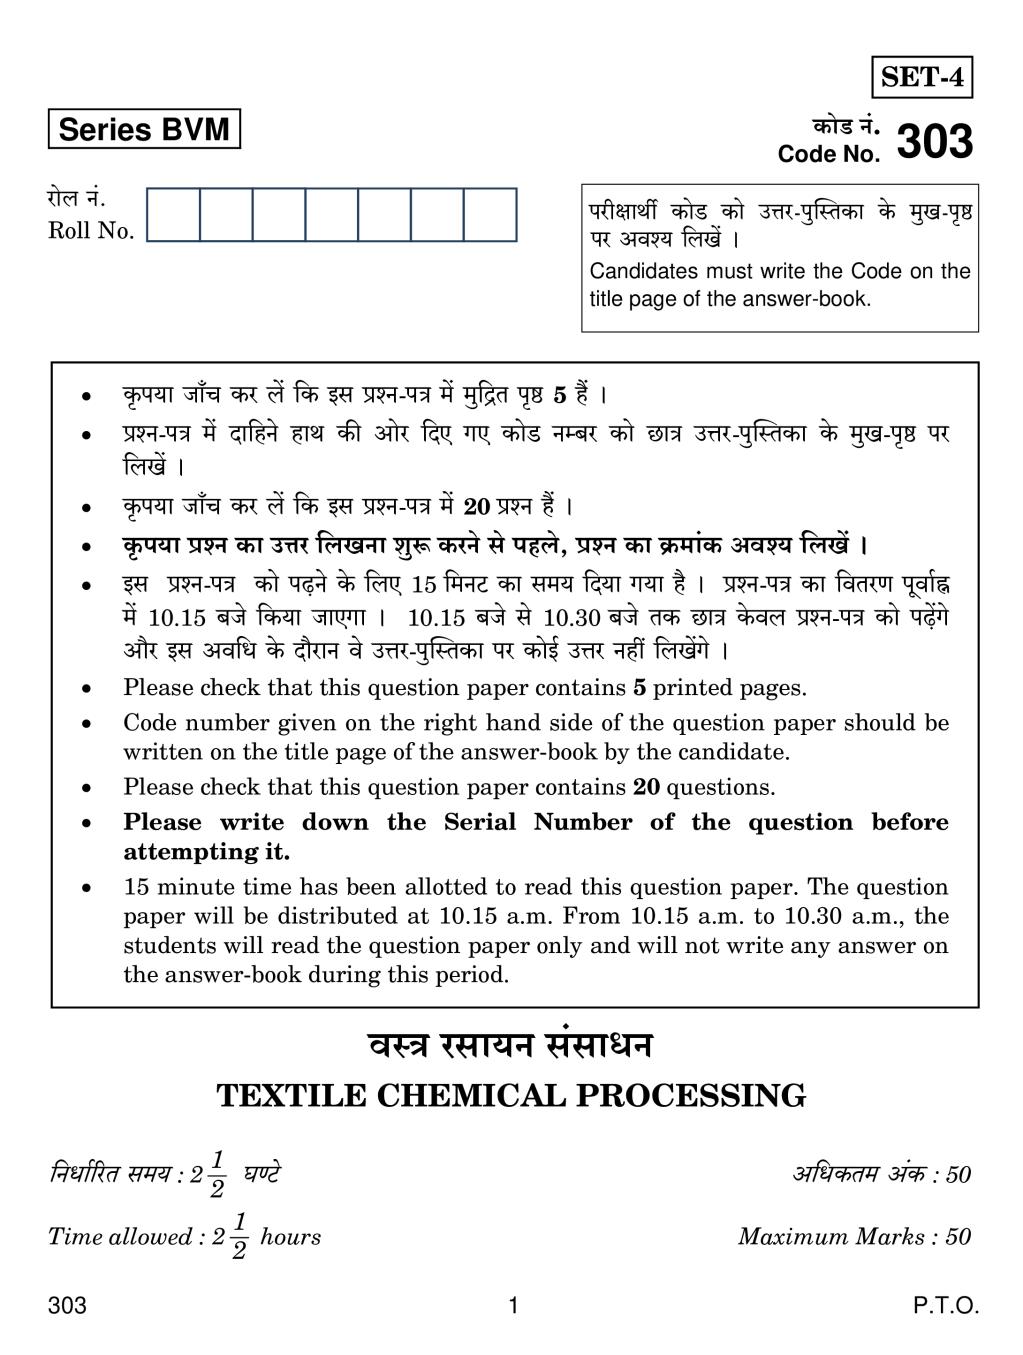 CBSE Class 12 Textile Chemical Processing Question Paper 2019 - Page 1